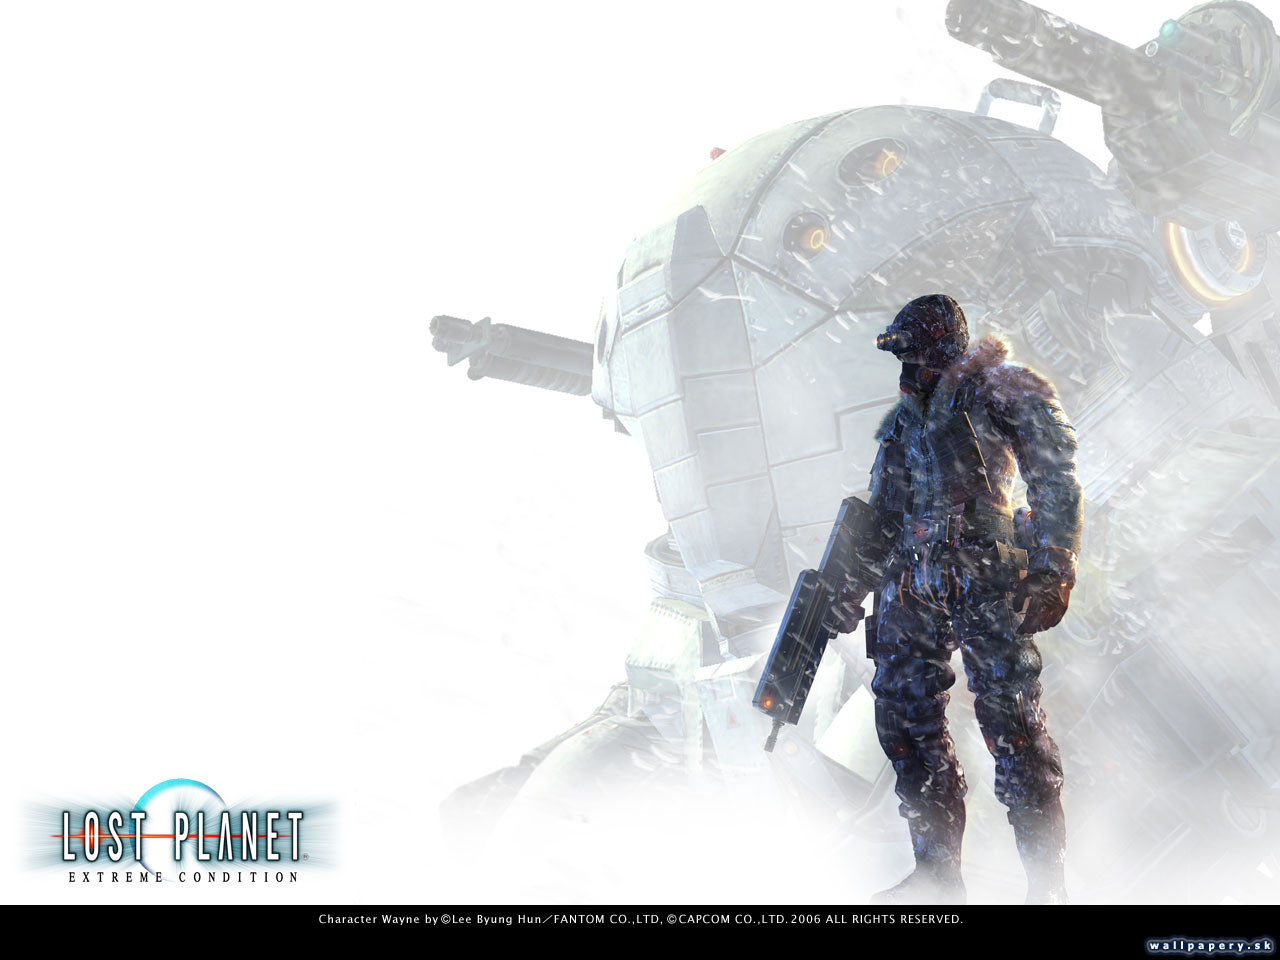 Lost Planet: Extreme Condition - wallpaper 11